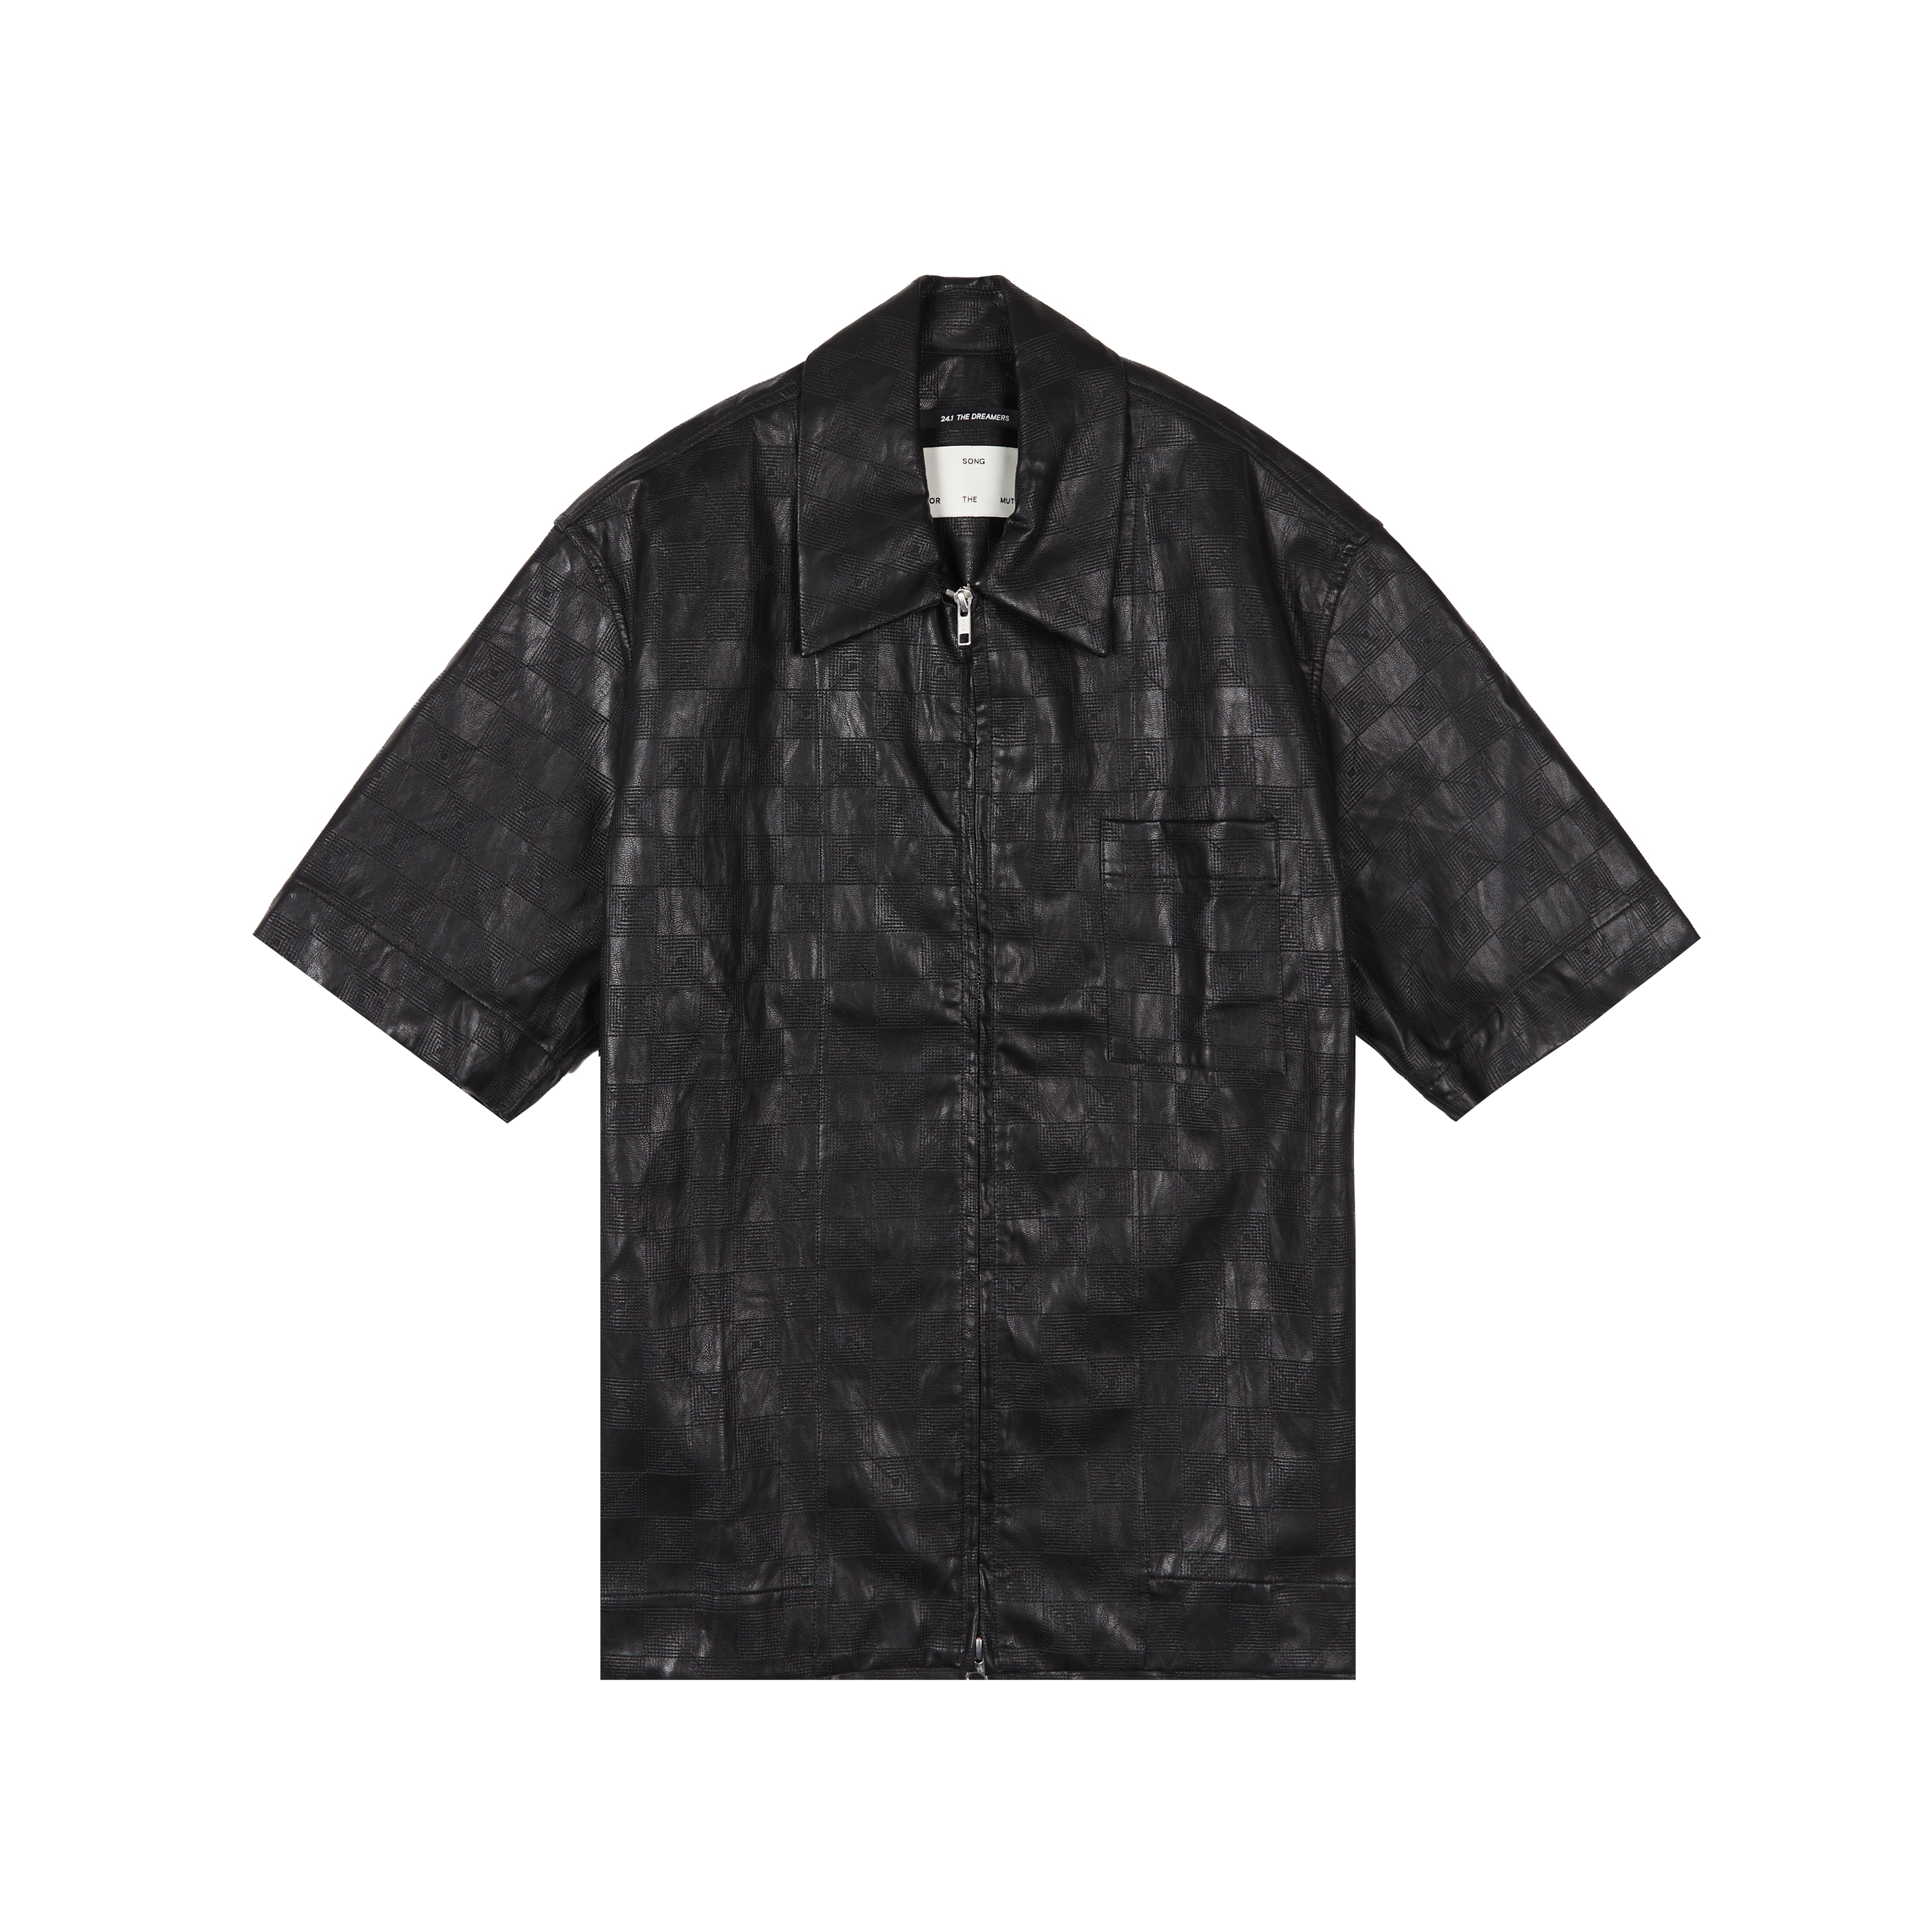 SONG FOR THE MUTE ZIP UP BOX SHIRT WITH TONAL CHECK PATTERN